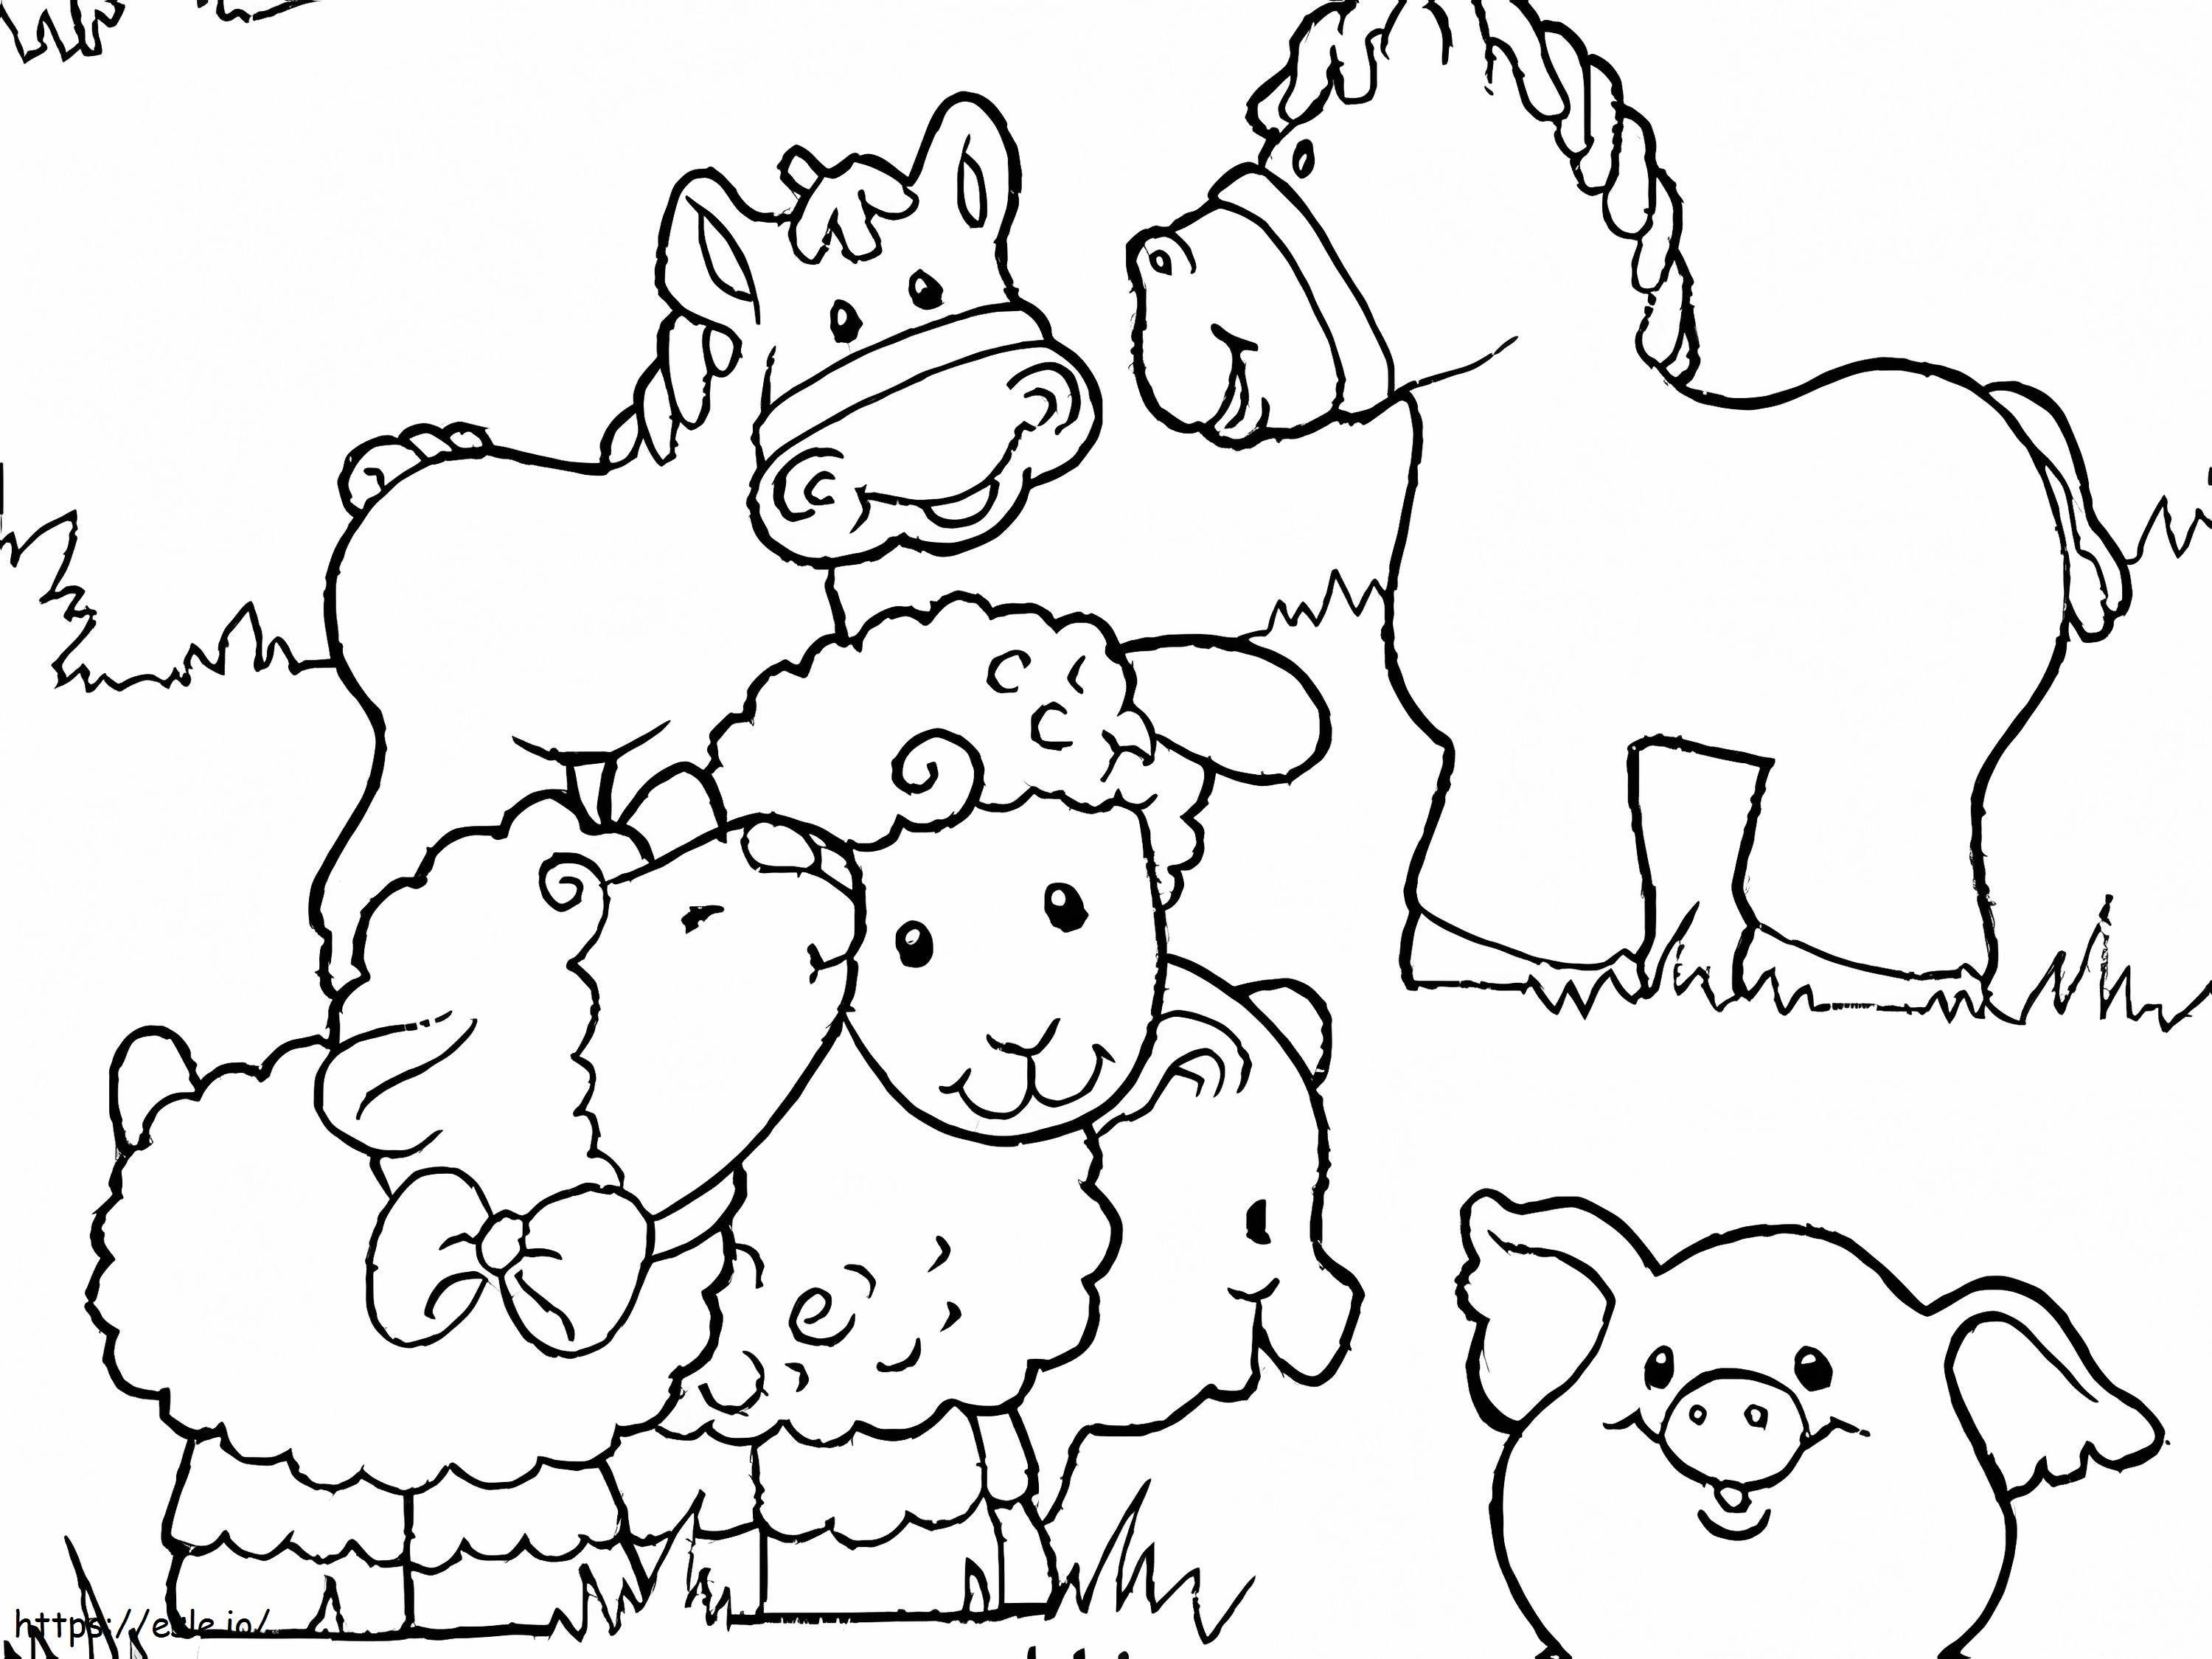 Three Animals On The Farm coloring page